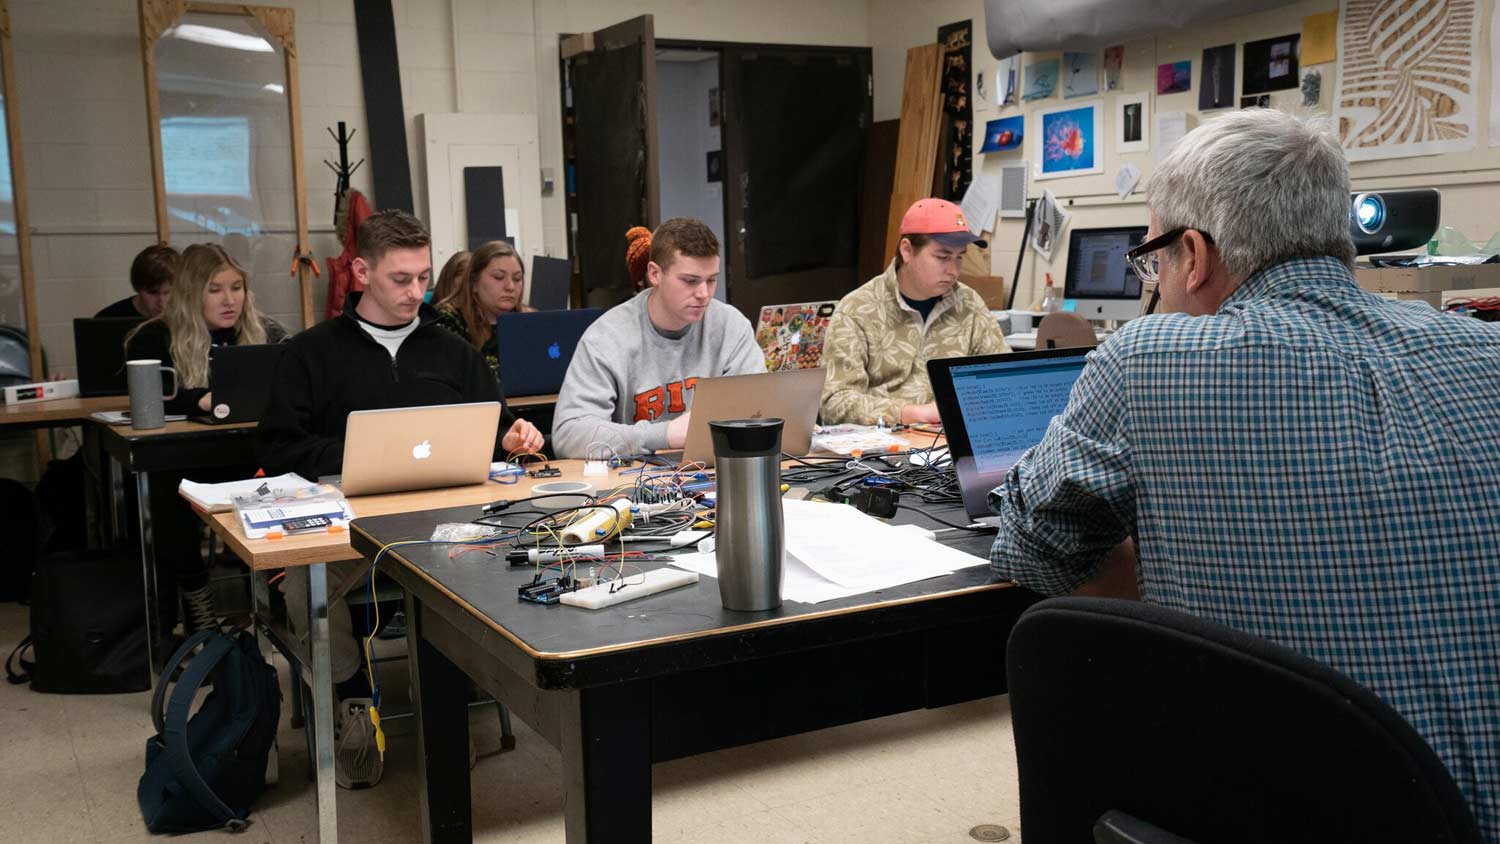 Students working on laptops in a small lab